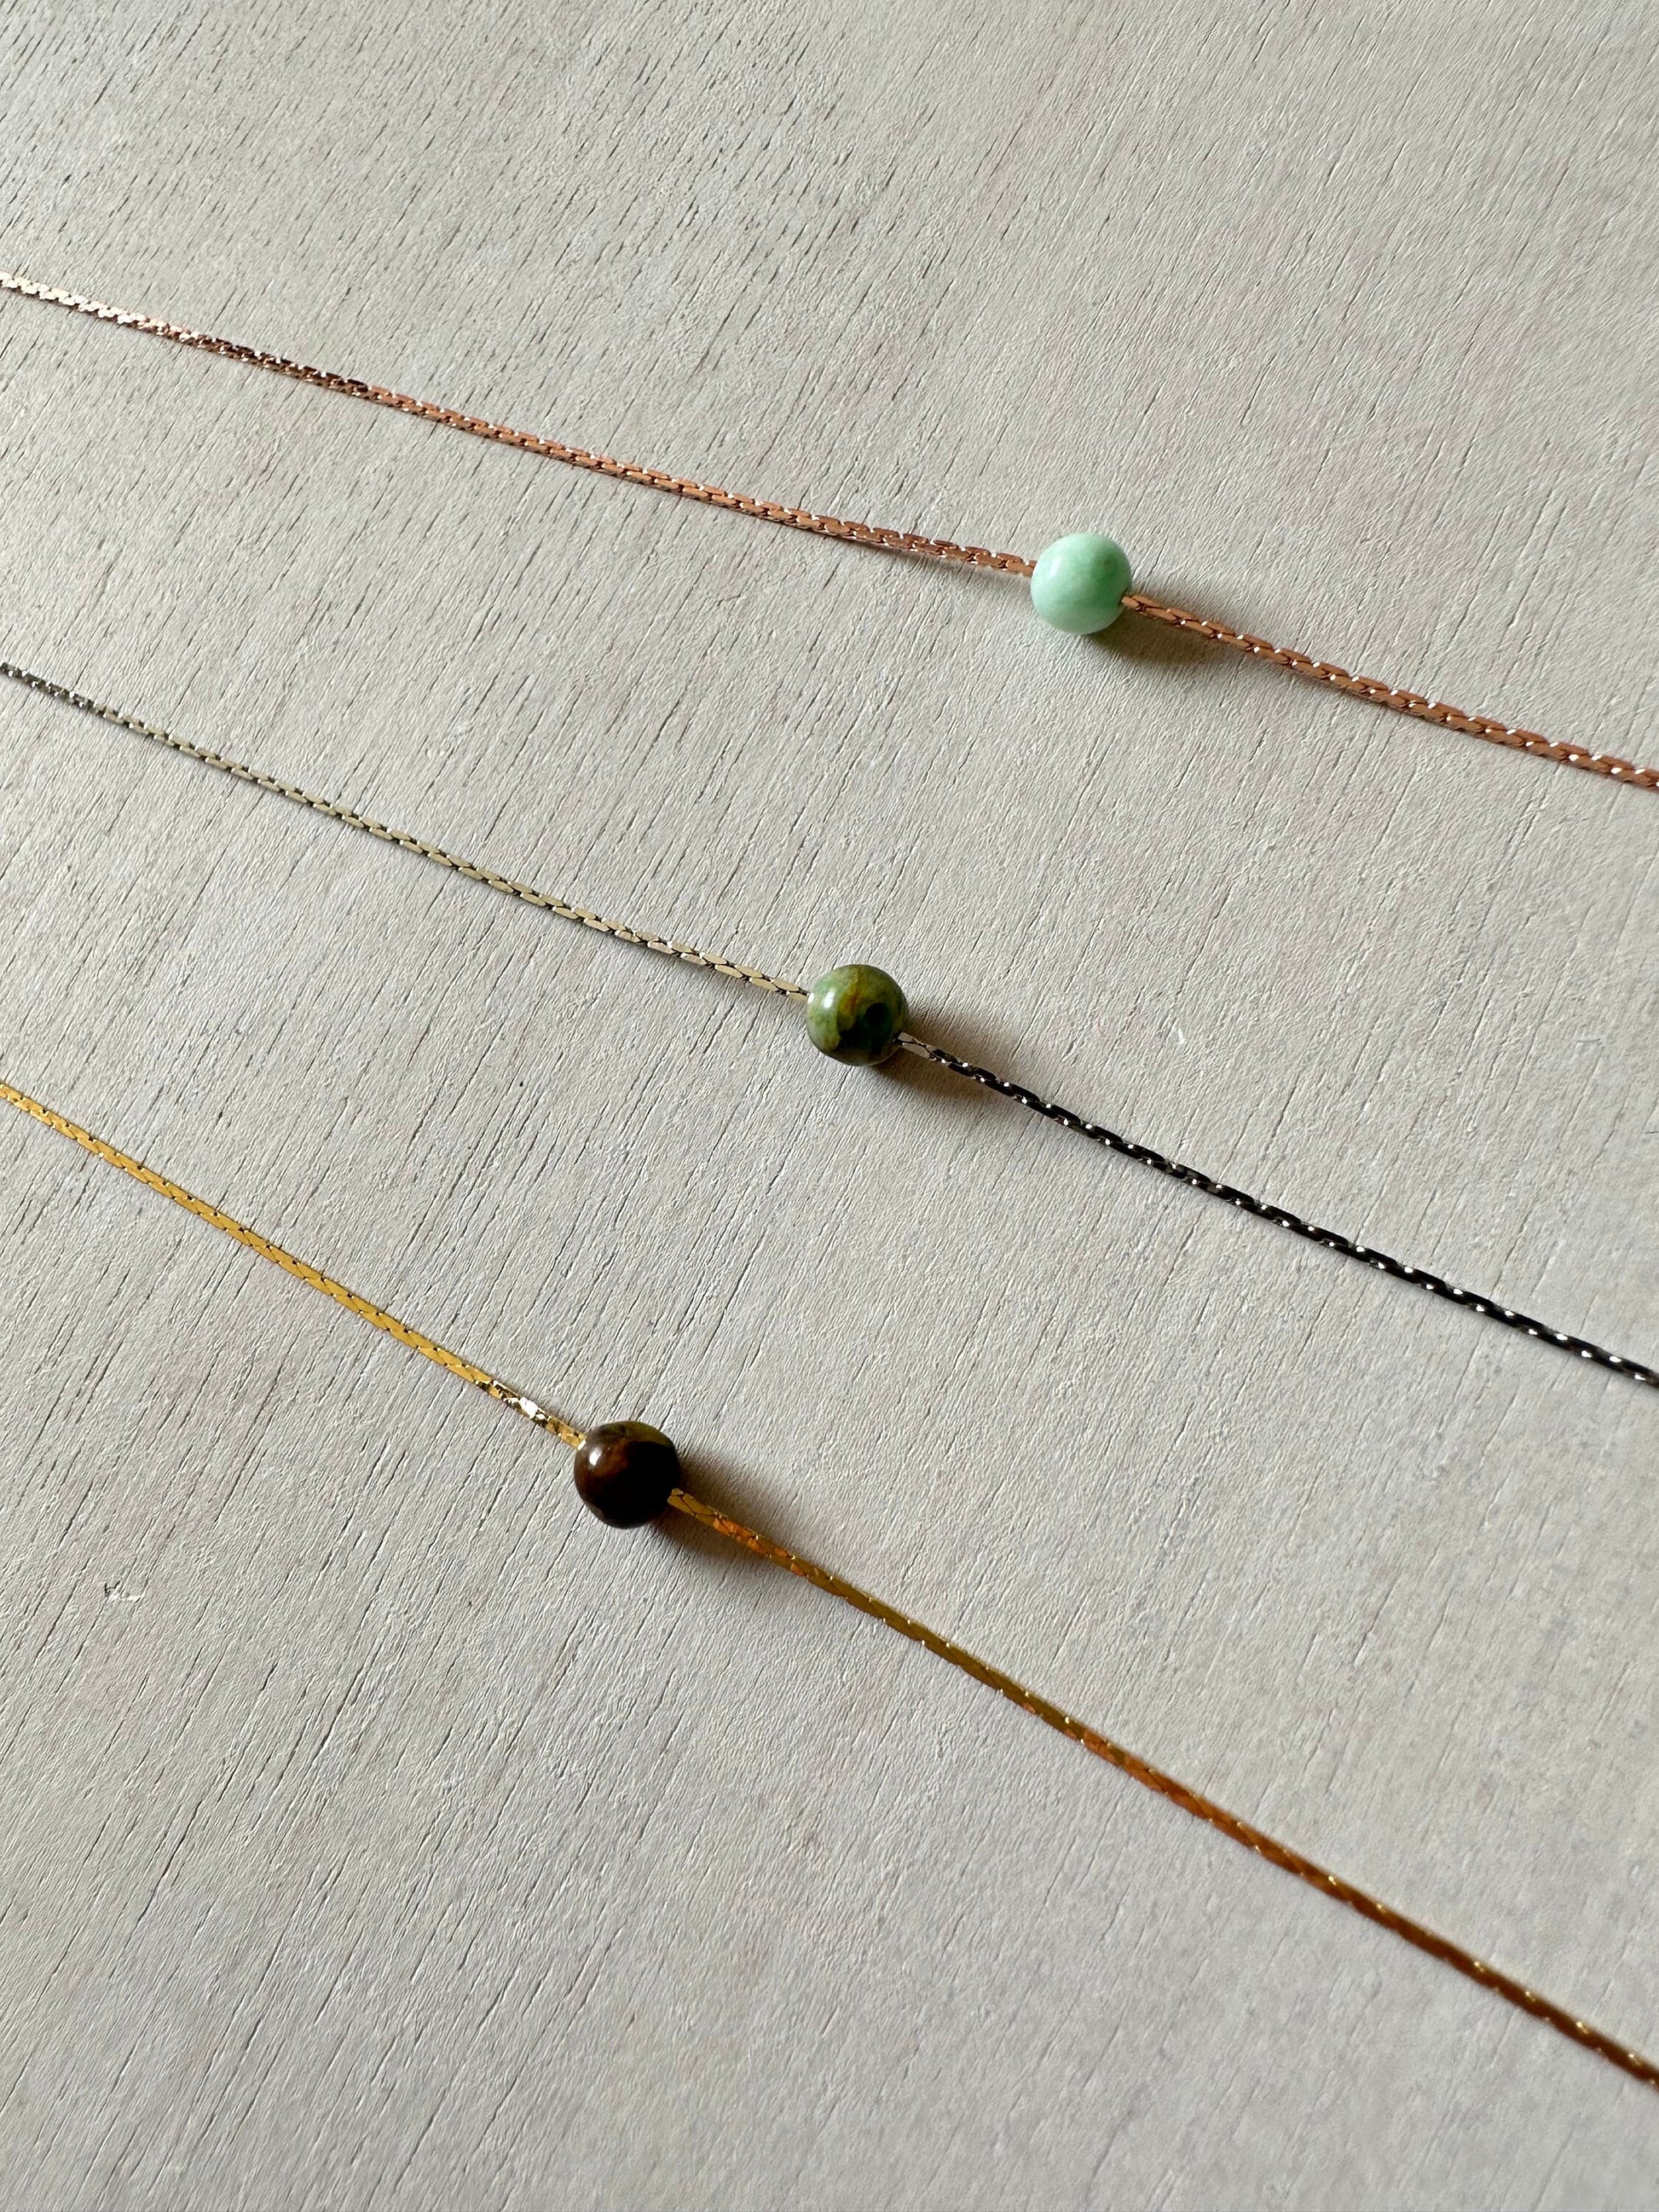 Chrysocolla Necklace | Rose Gold | Gold | Silver | Dainty Necklace | Layering Necklace | Gemstone Necklace | Bead Necklace